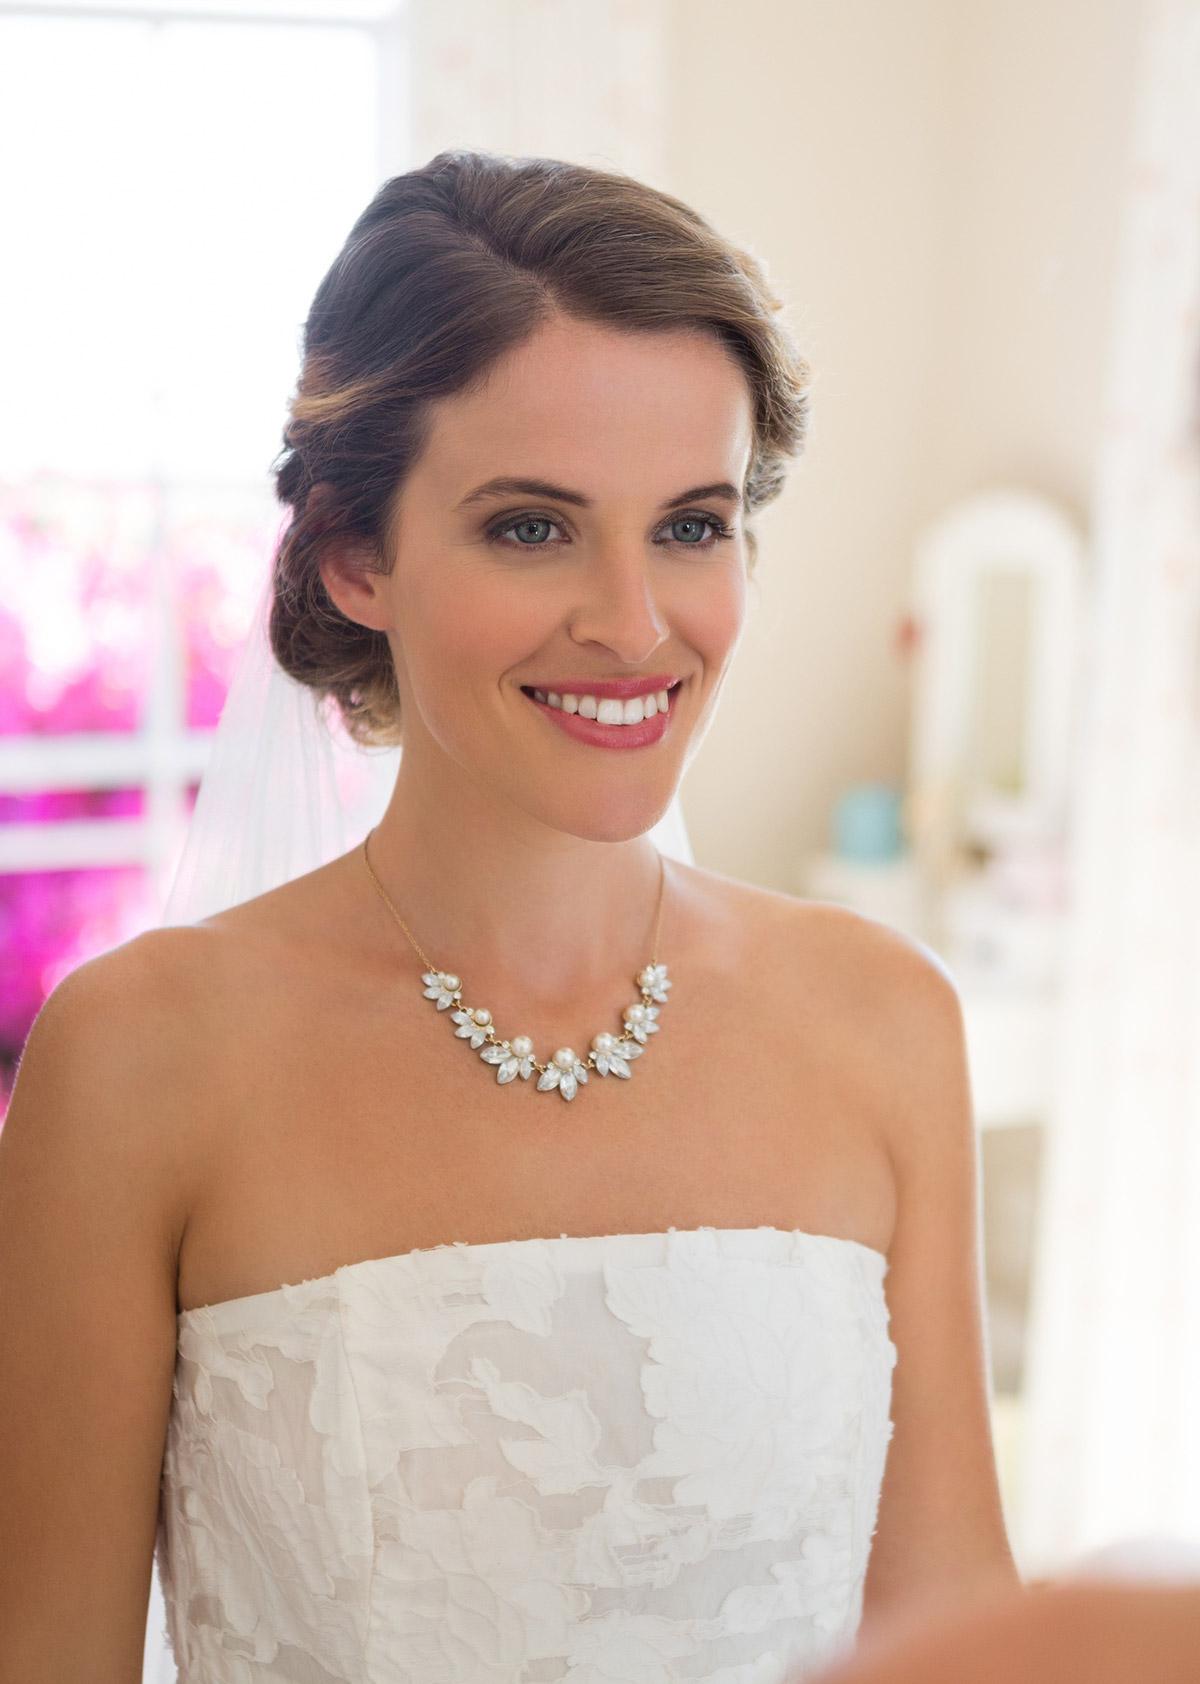 Close up image of a bride wearing a statement diamond necklace and strapless wedding dress